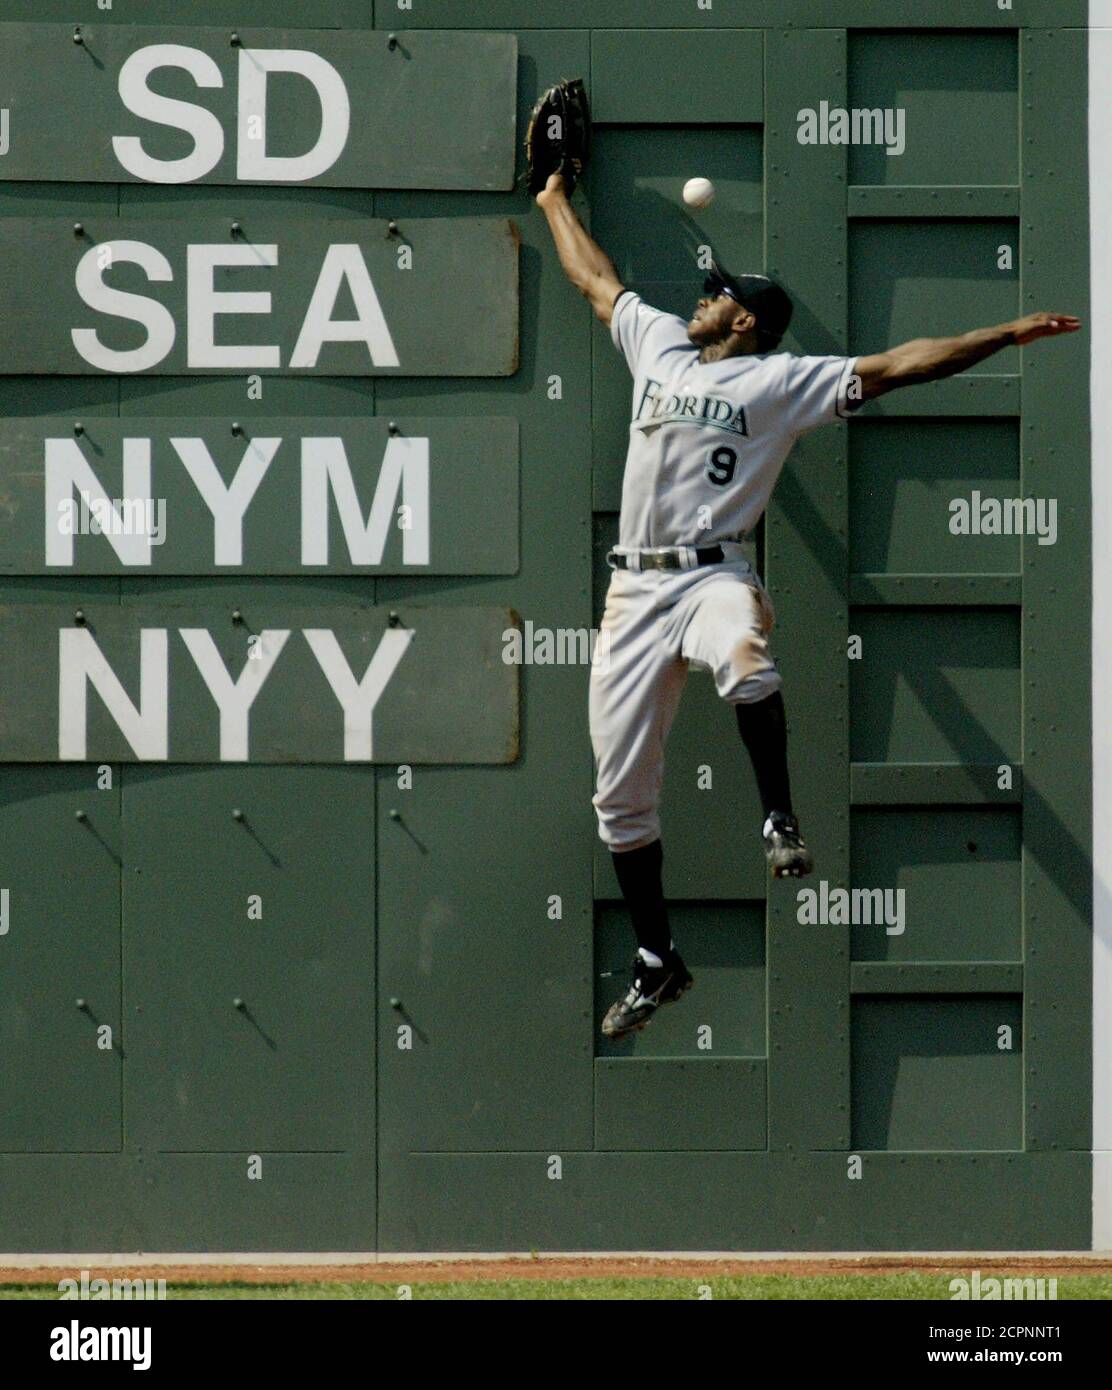 Florida Marlins' centerfielder Juan Pierre leaps for, and misses, a double off the Fenway Park 'Green Monster' scoreboard by Boston Red Sox batter Bill Mueller in the fifth inning June 29, 2003 at Fenway Park in Boston. REUTERS/Jim Bourg  JRB/GAC Stock Photo